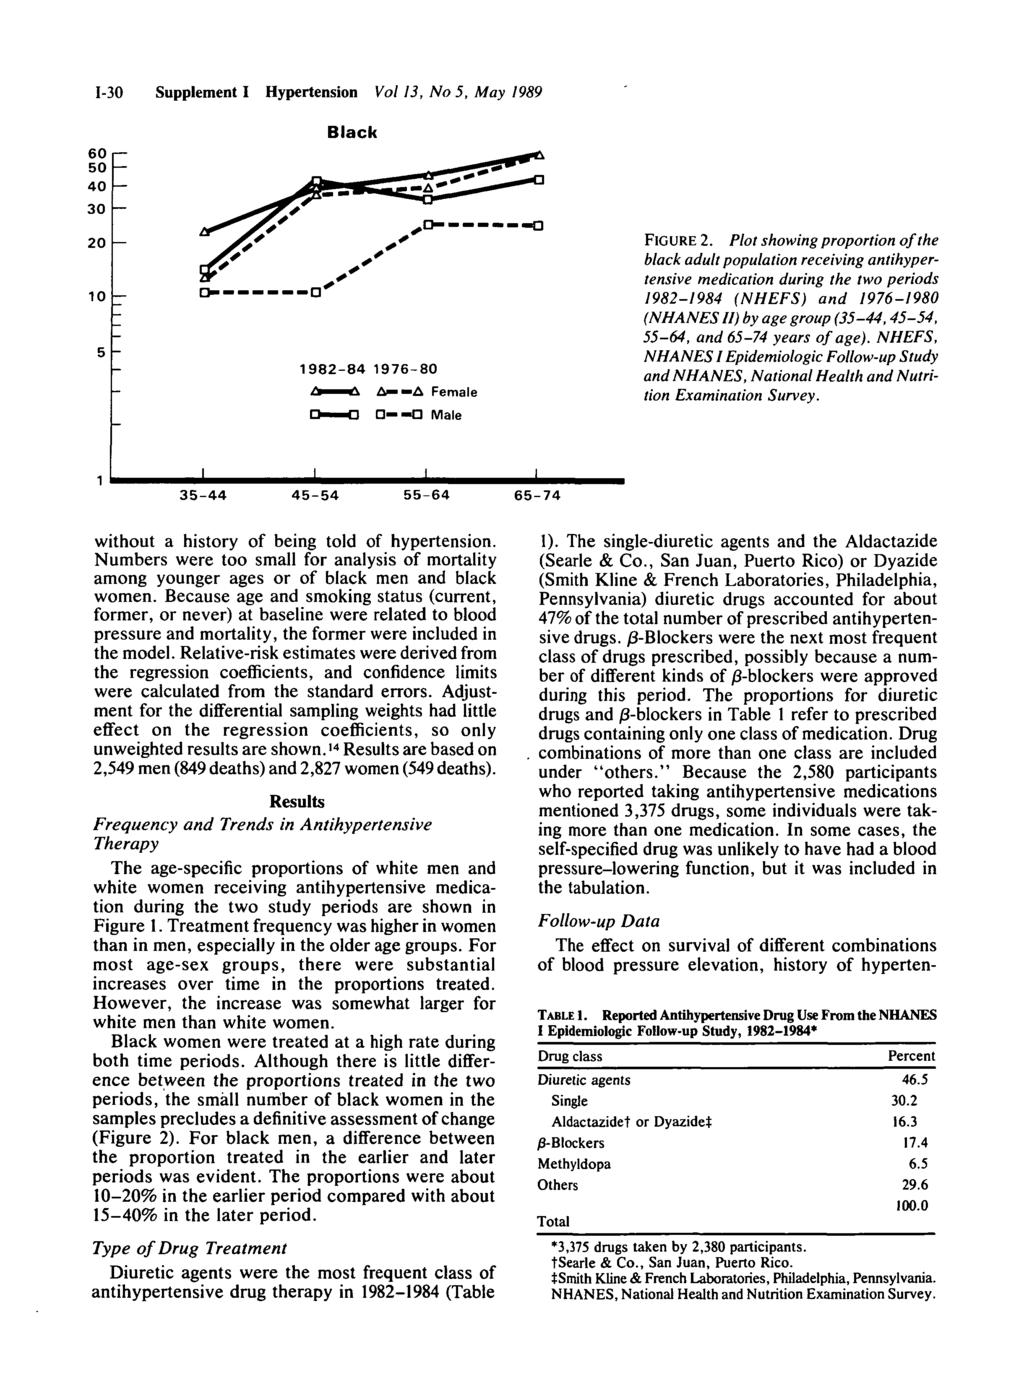 1-30 60 50 40 30-20 - 10-5 - - - Supplement I Hypertension Vol 13, No 5, May 1989 Black 1982-84 1976-80 i^ ^^ A A Female r>""h3 D "O Male FIGURE 2.